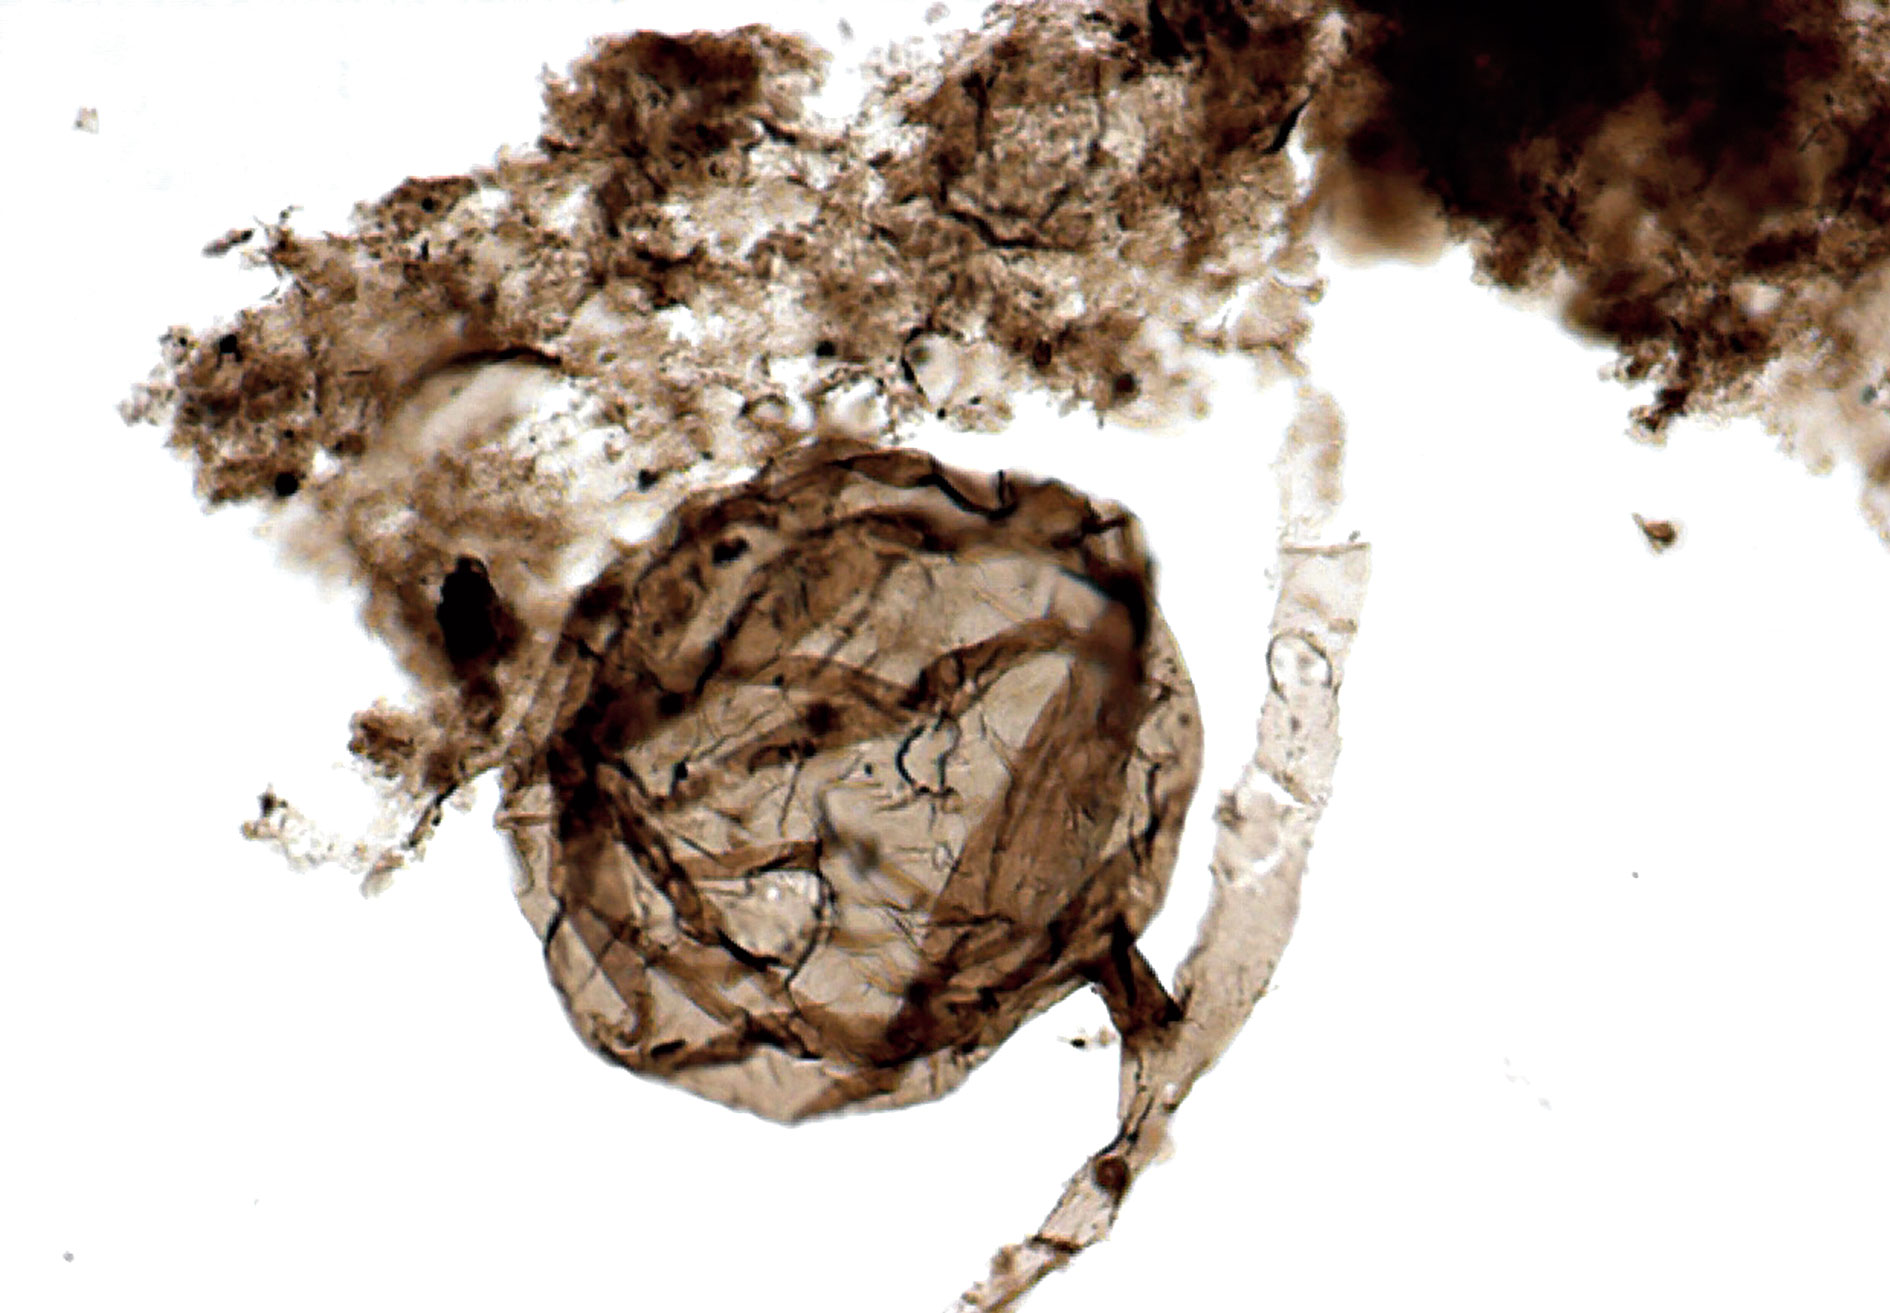 A microfossil of Ourasphaira giraldae that was found in the Arctic region of Canada.